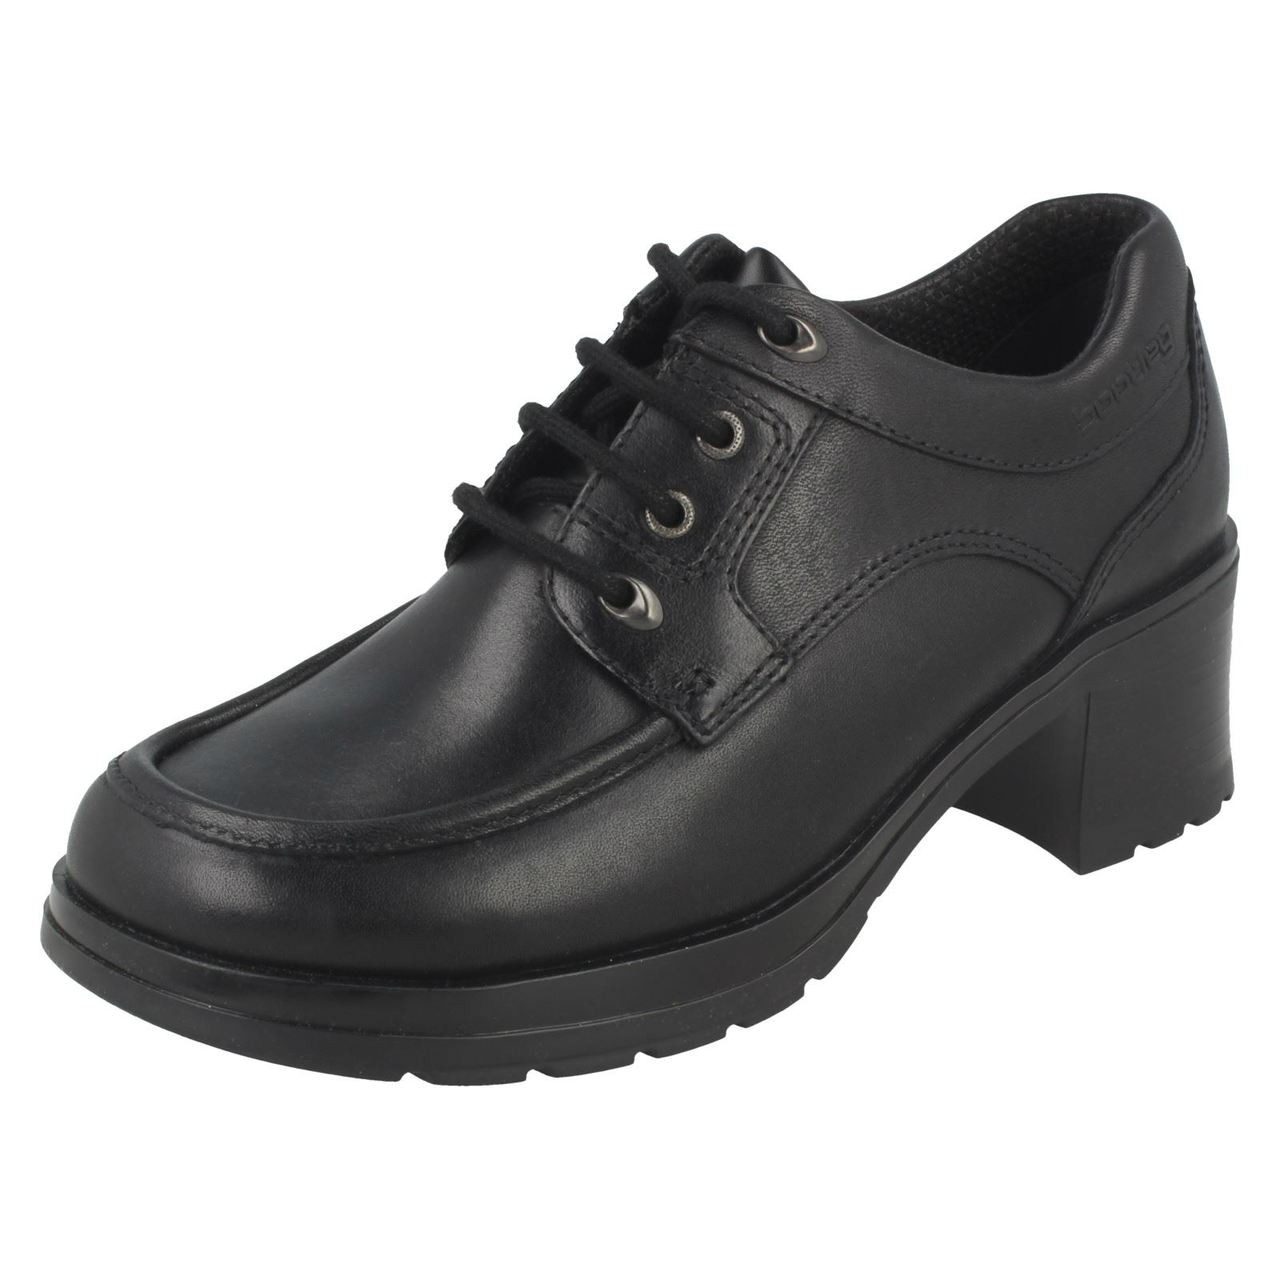 clarks girls lace up shoes